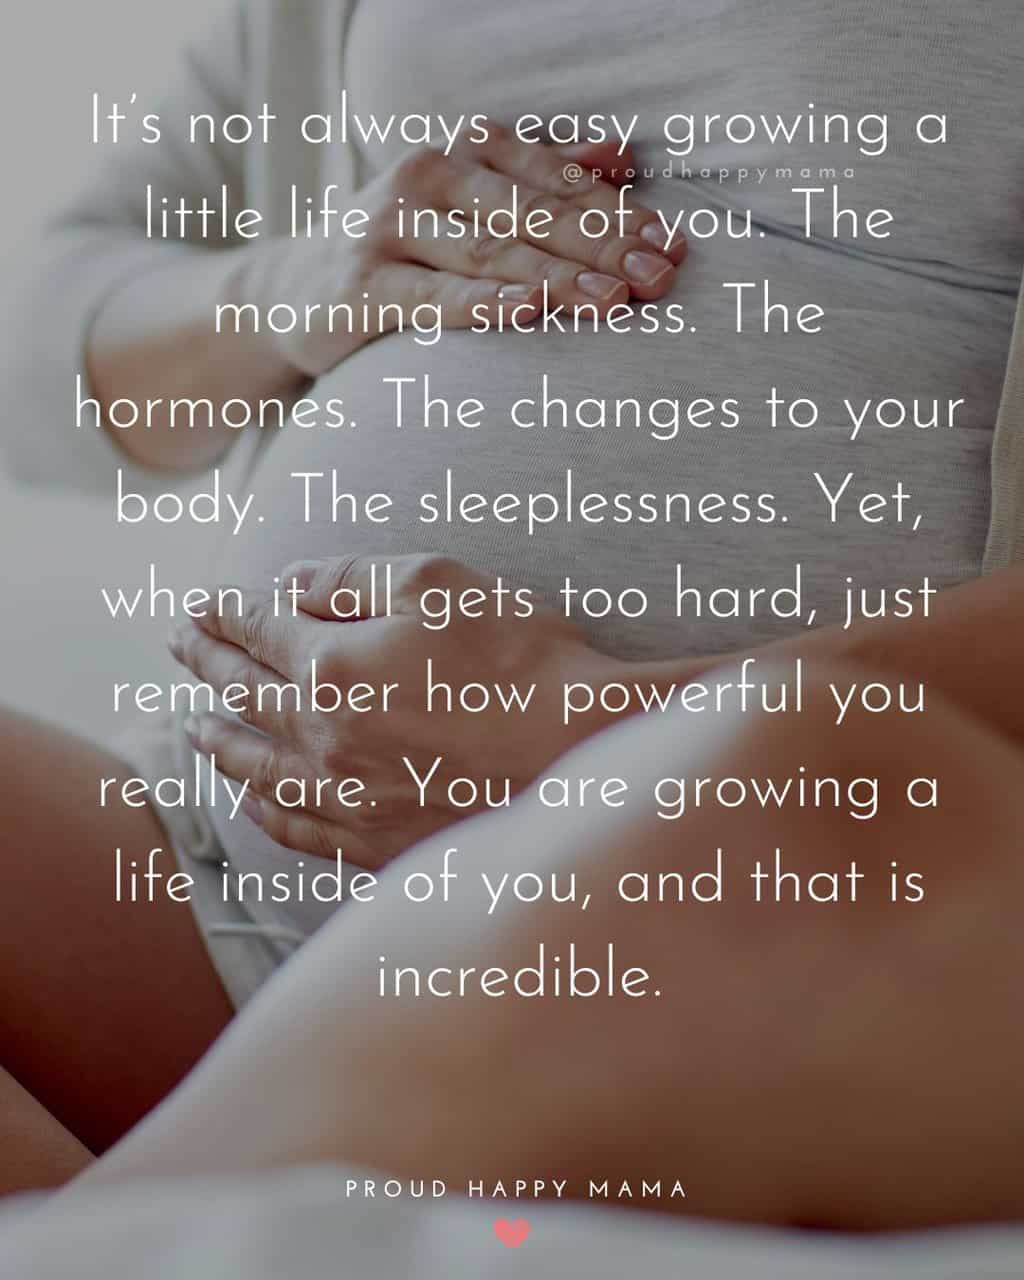 First Time Pregnancy Quotes | It’s not always easy growing a little life inside of you. The morning sickness. The hormones. The changes to your body. The sleeplessness. Yet, when it all gets too hard, just remember how powerful you really are. You are growing a life inside of you, and that is incredible.